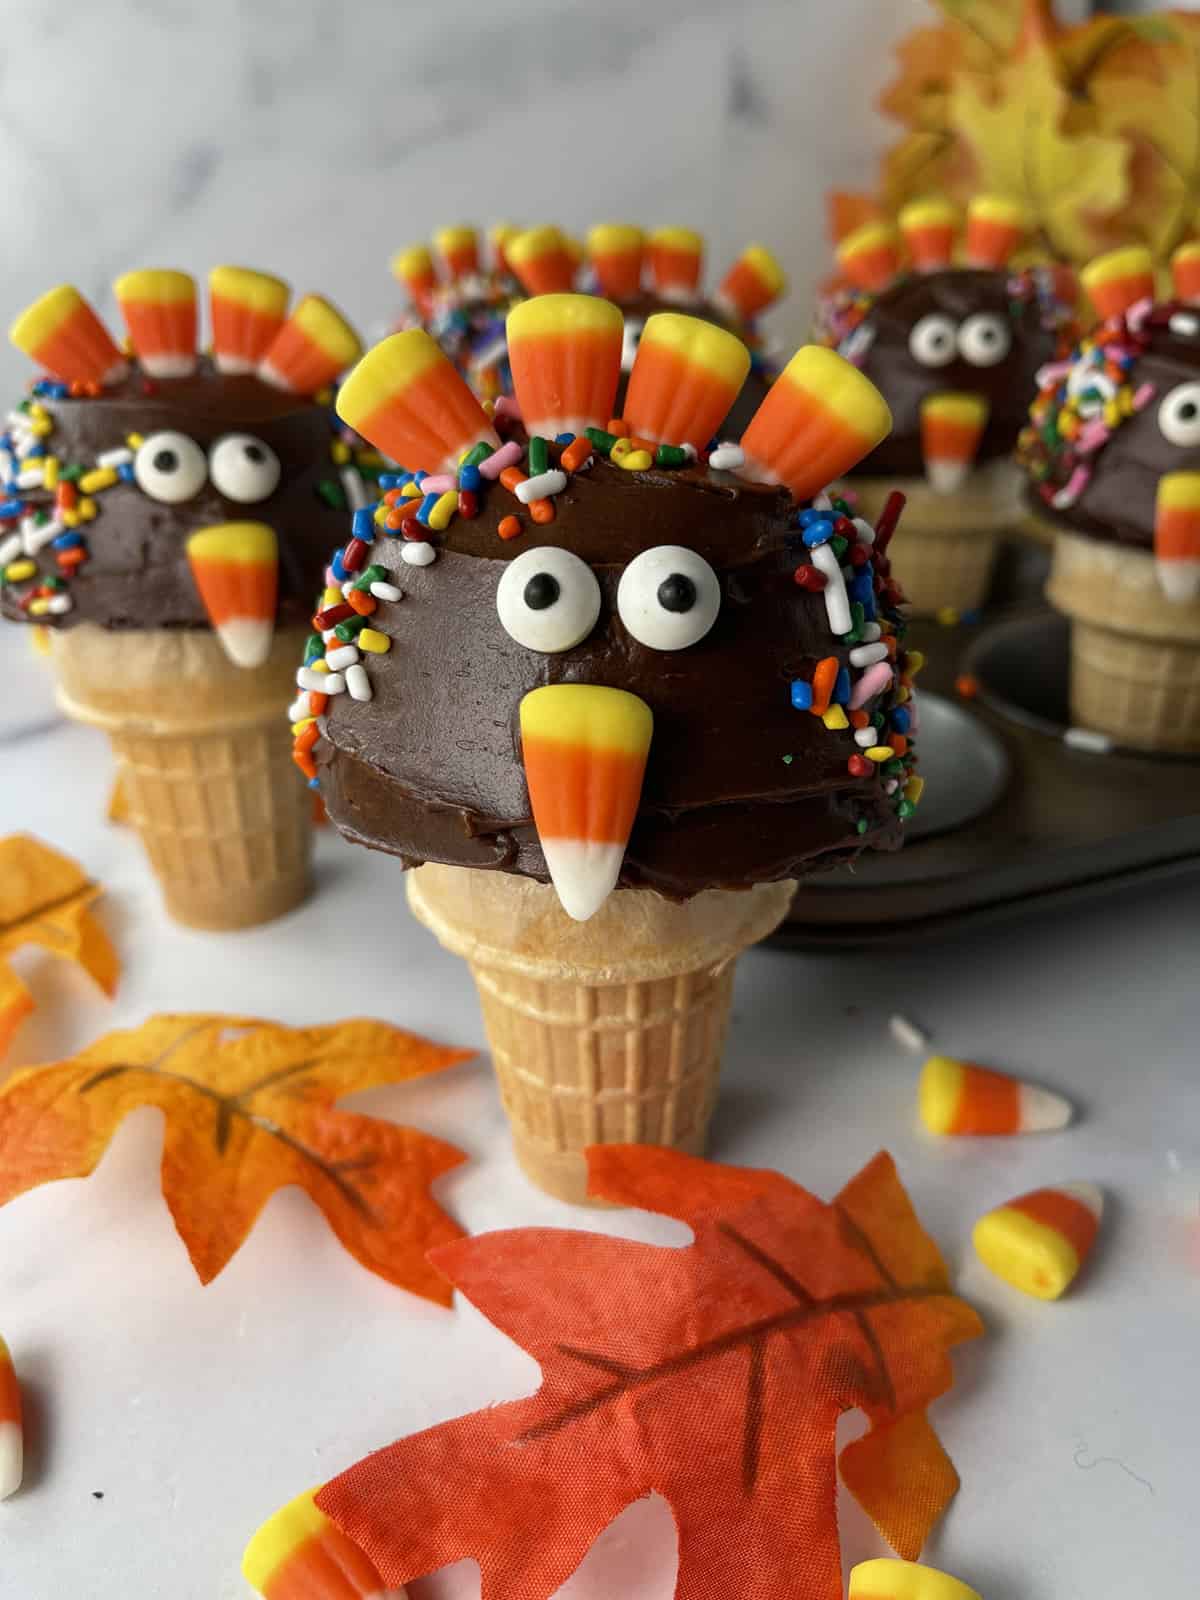 Cute cupcakes decorated to look like Thanksgiving turkeys.